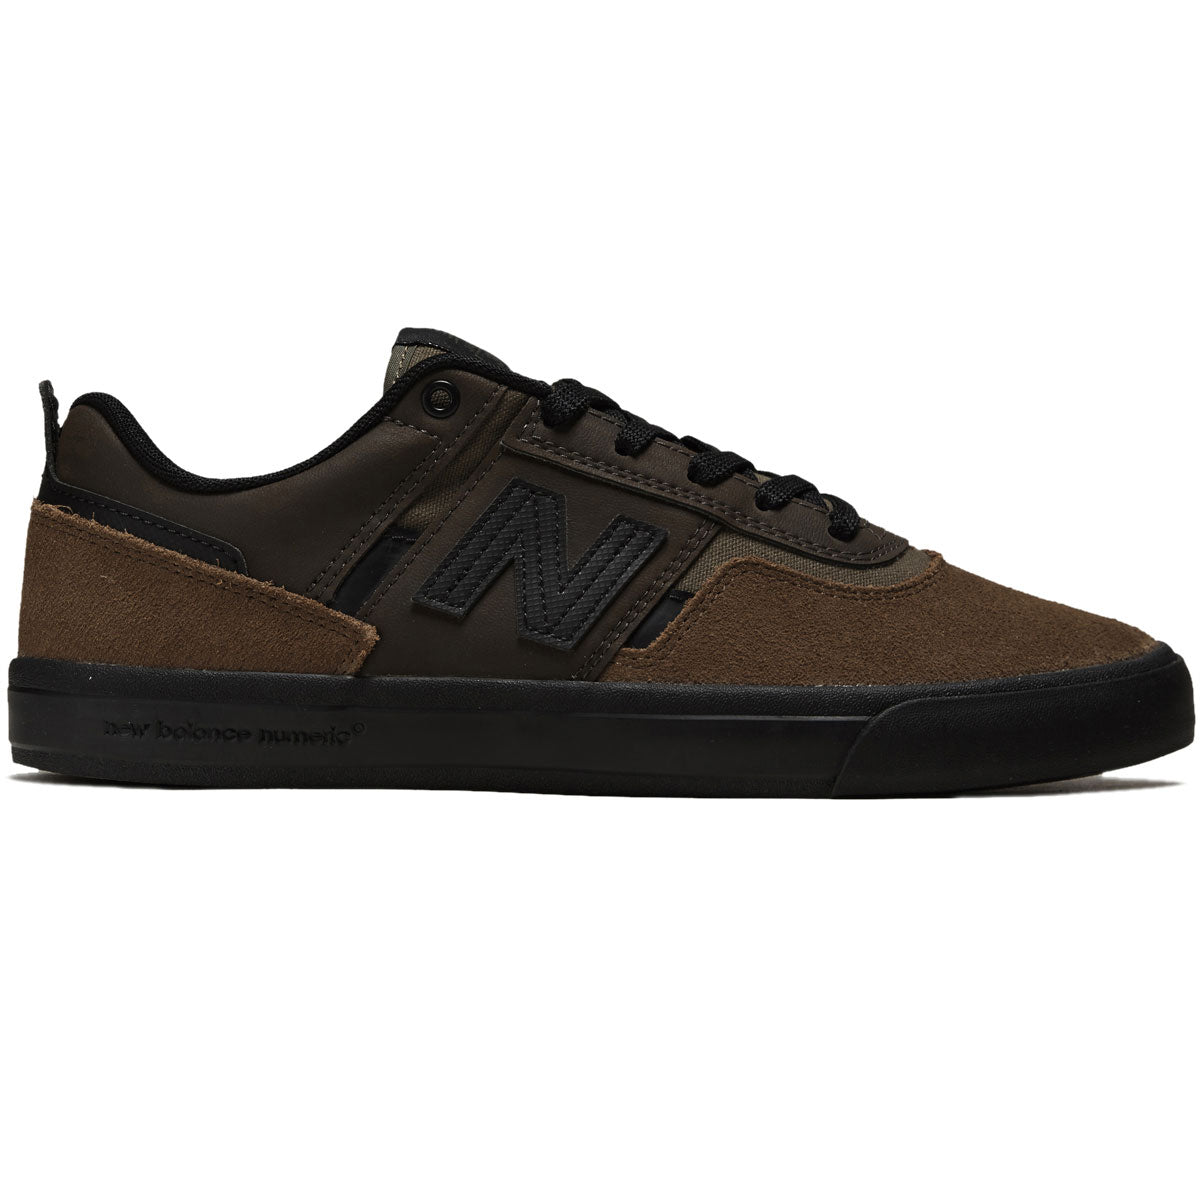 New Balance 306 Foy Shoes - Brown/Black image 1